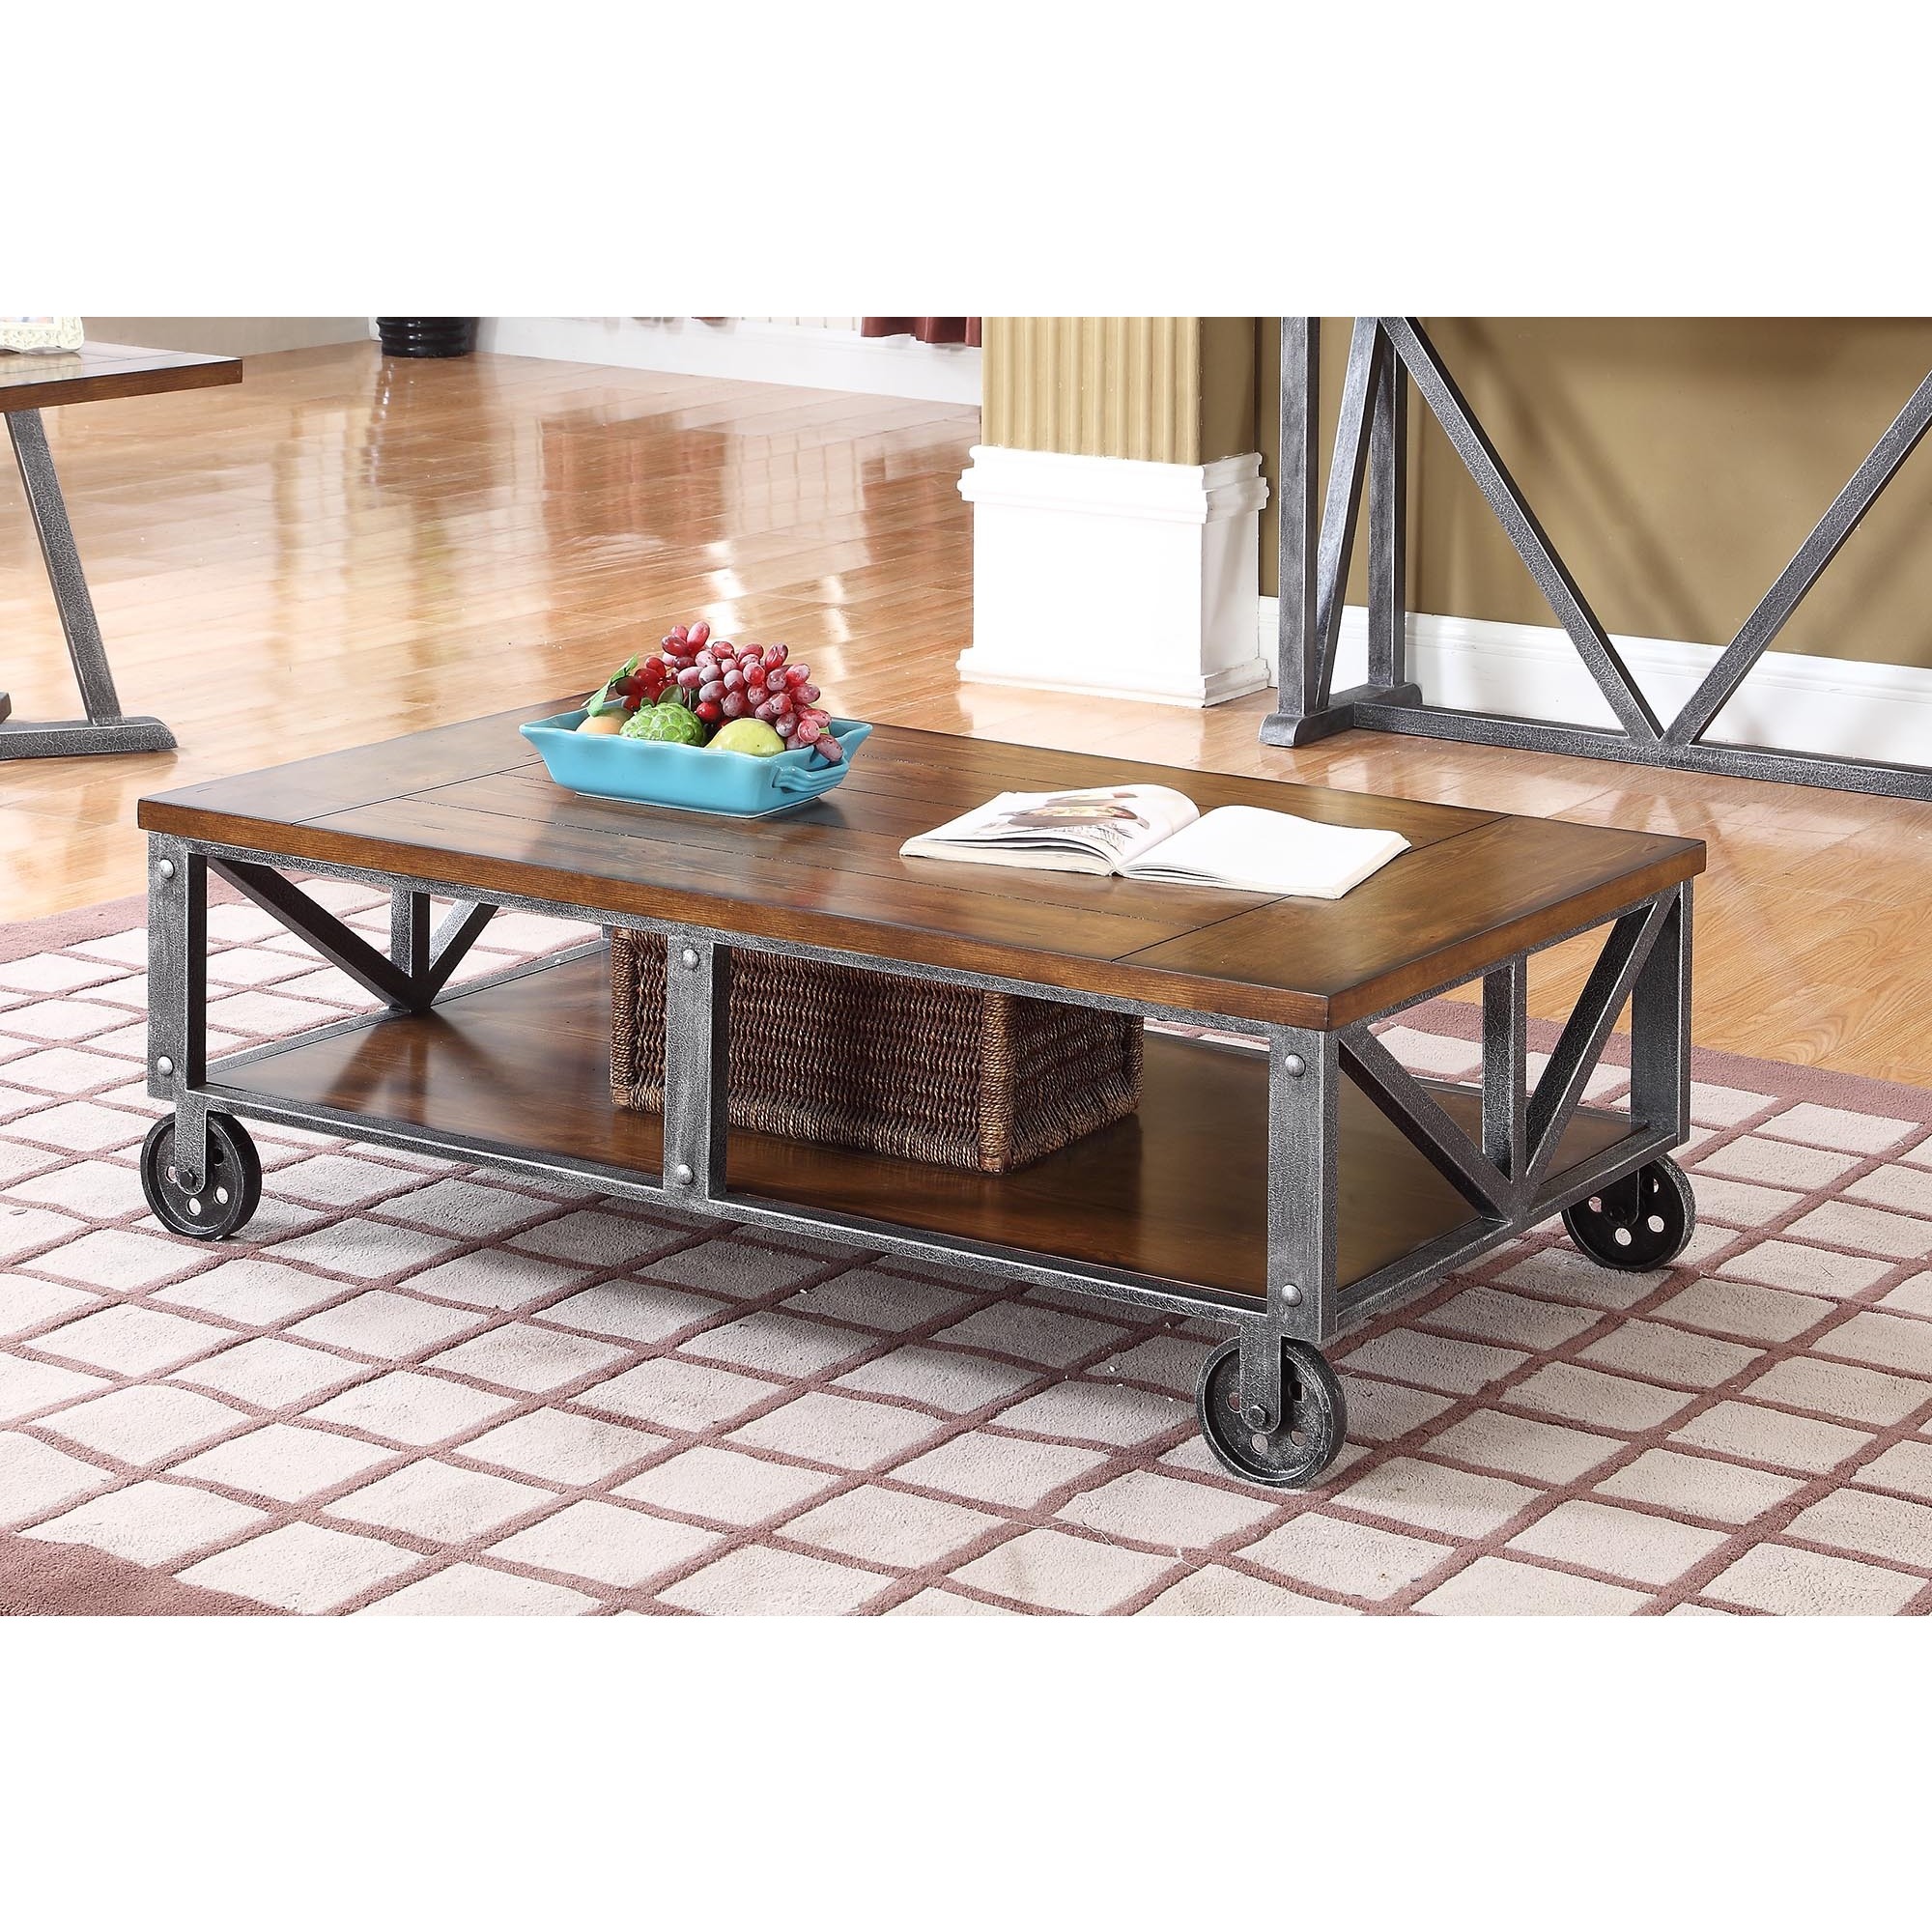 Best Master Furniture Dx500 Wood Coffee Table On Sale Overstock 15033375